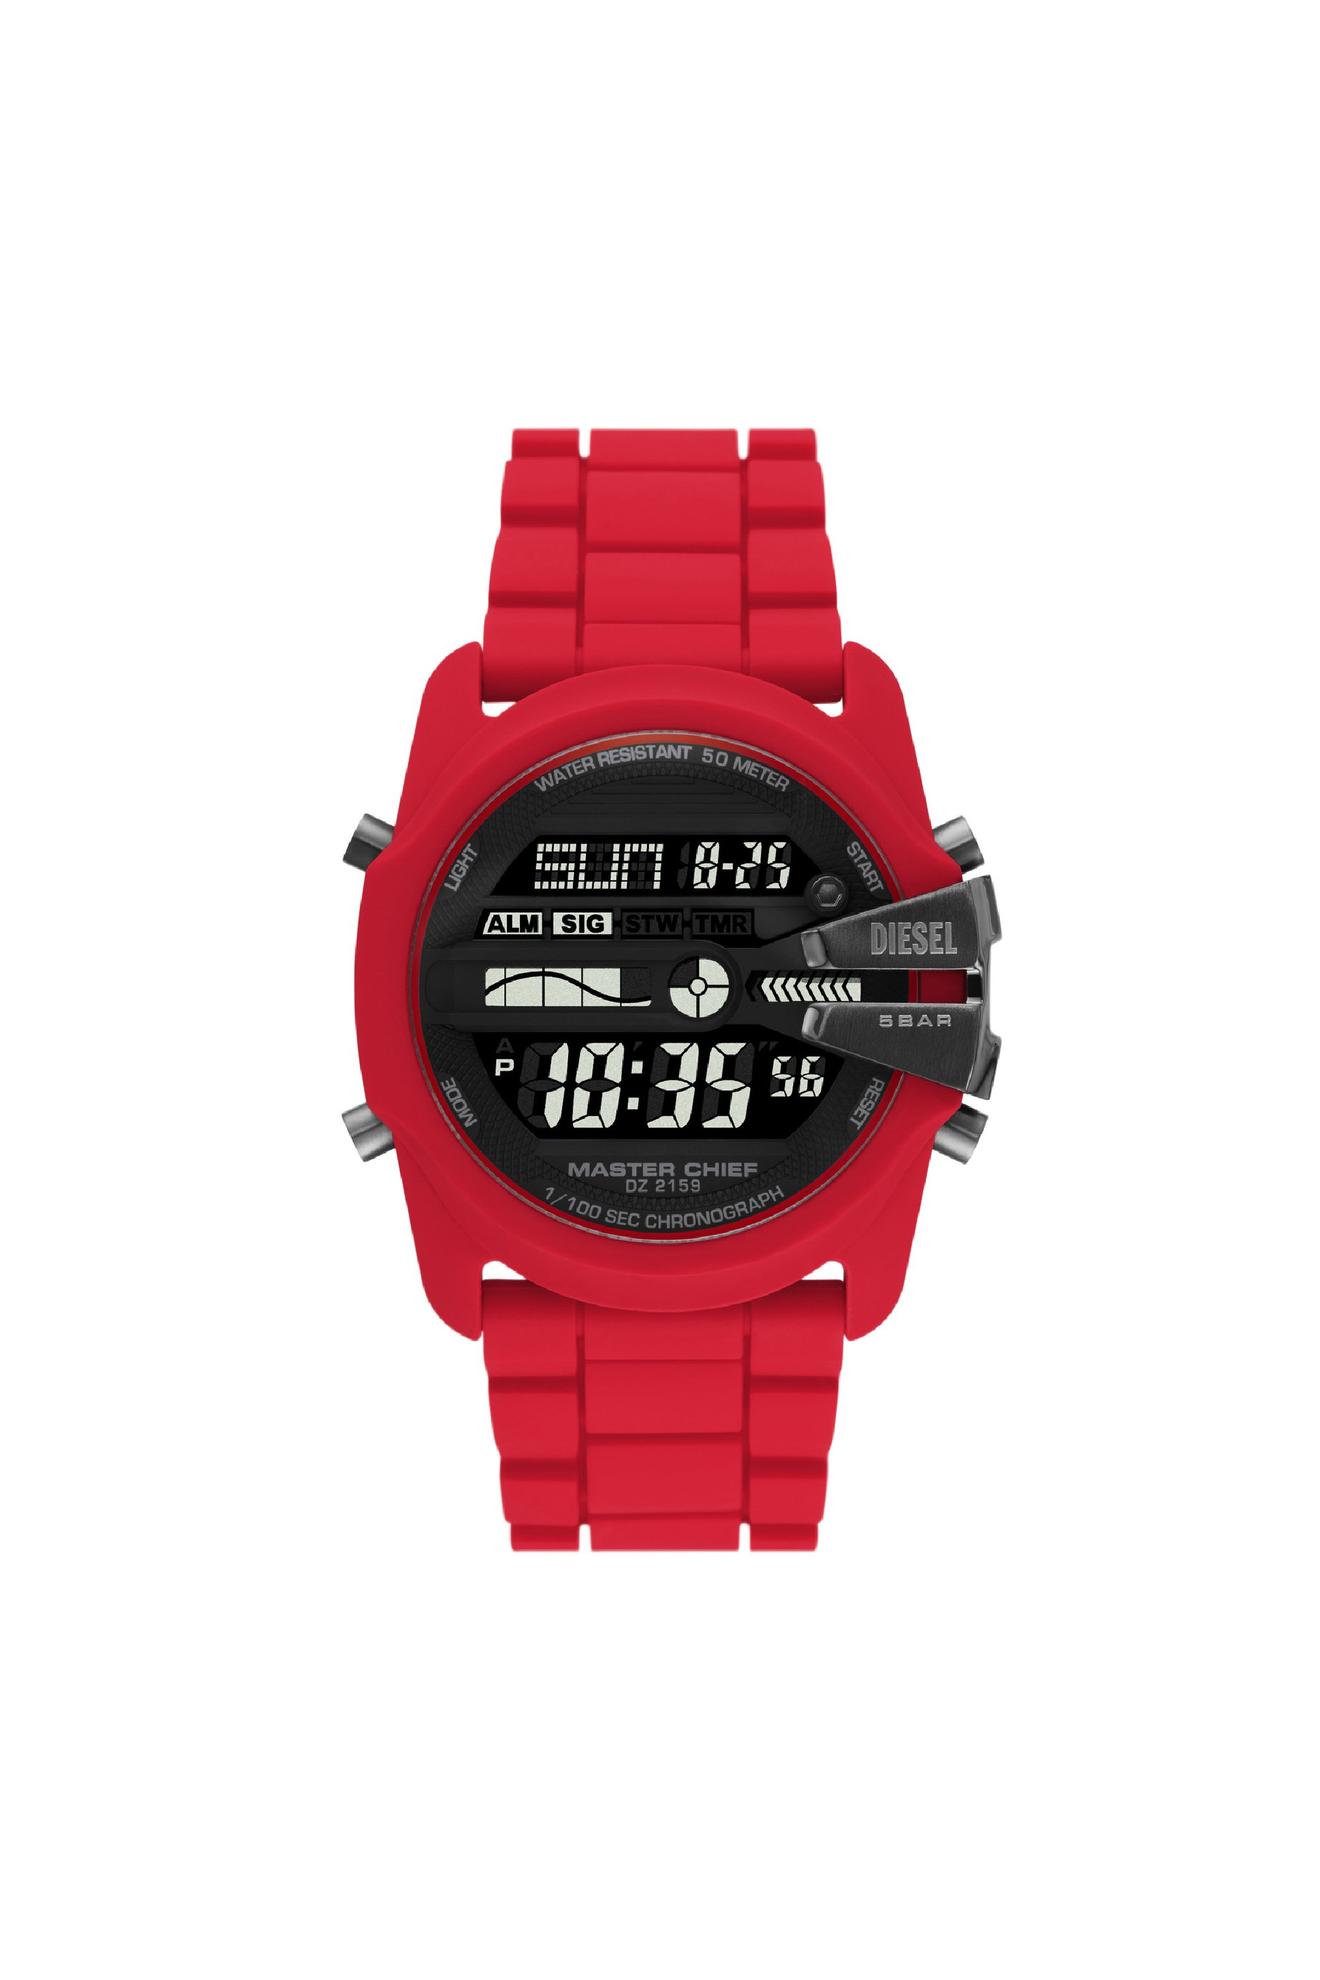 Master Chief Digital silicone watch offers at £89 in Diesel